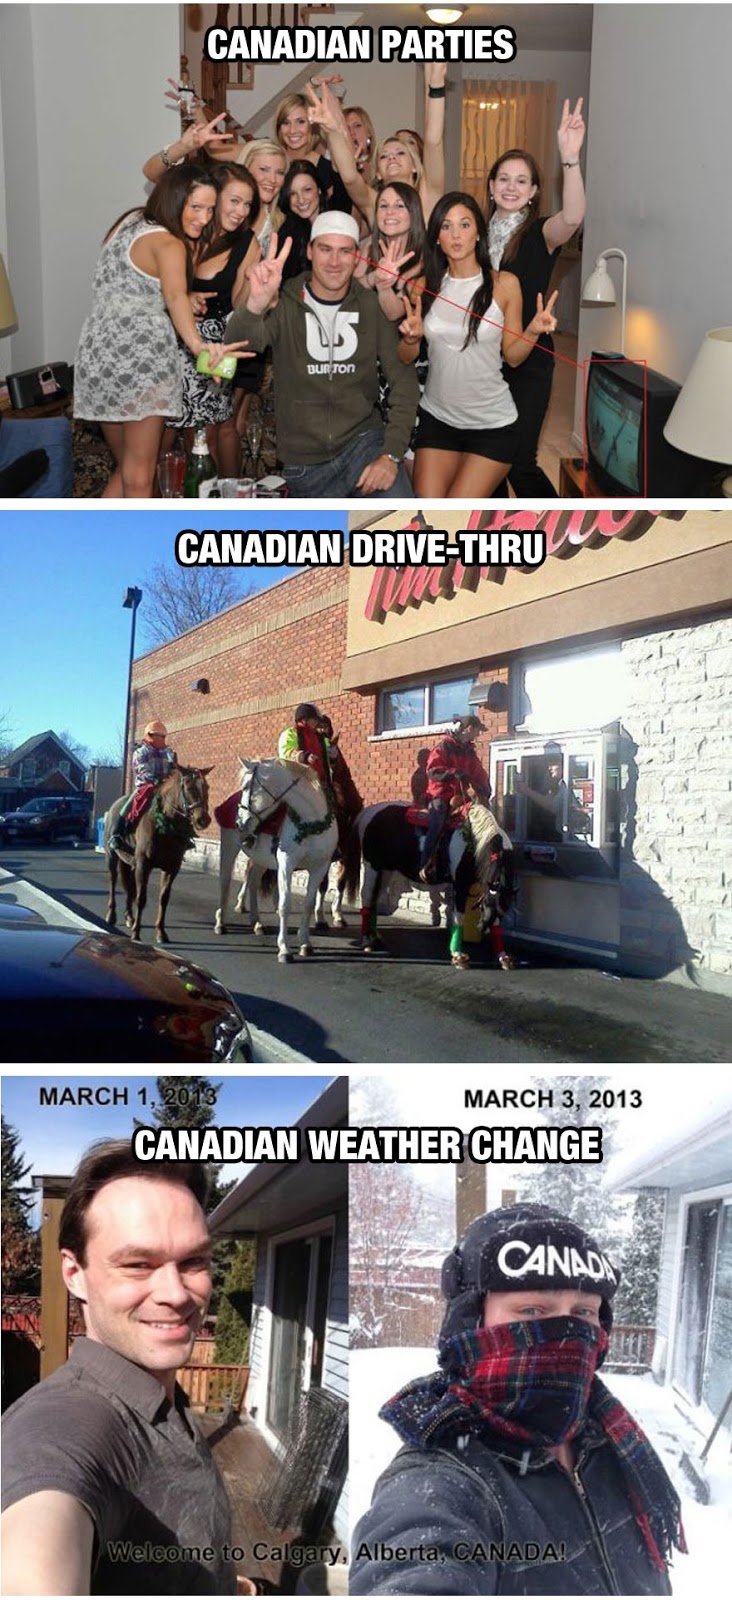 We do things differently in Canada, eh?